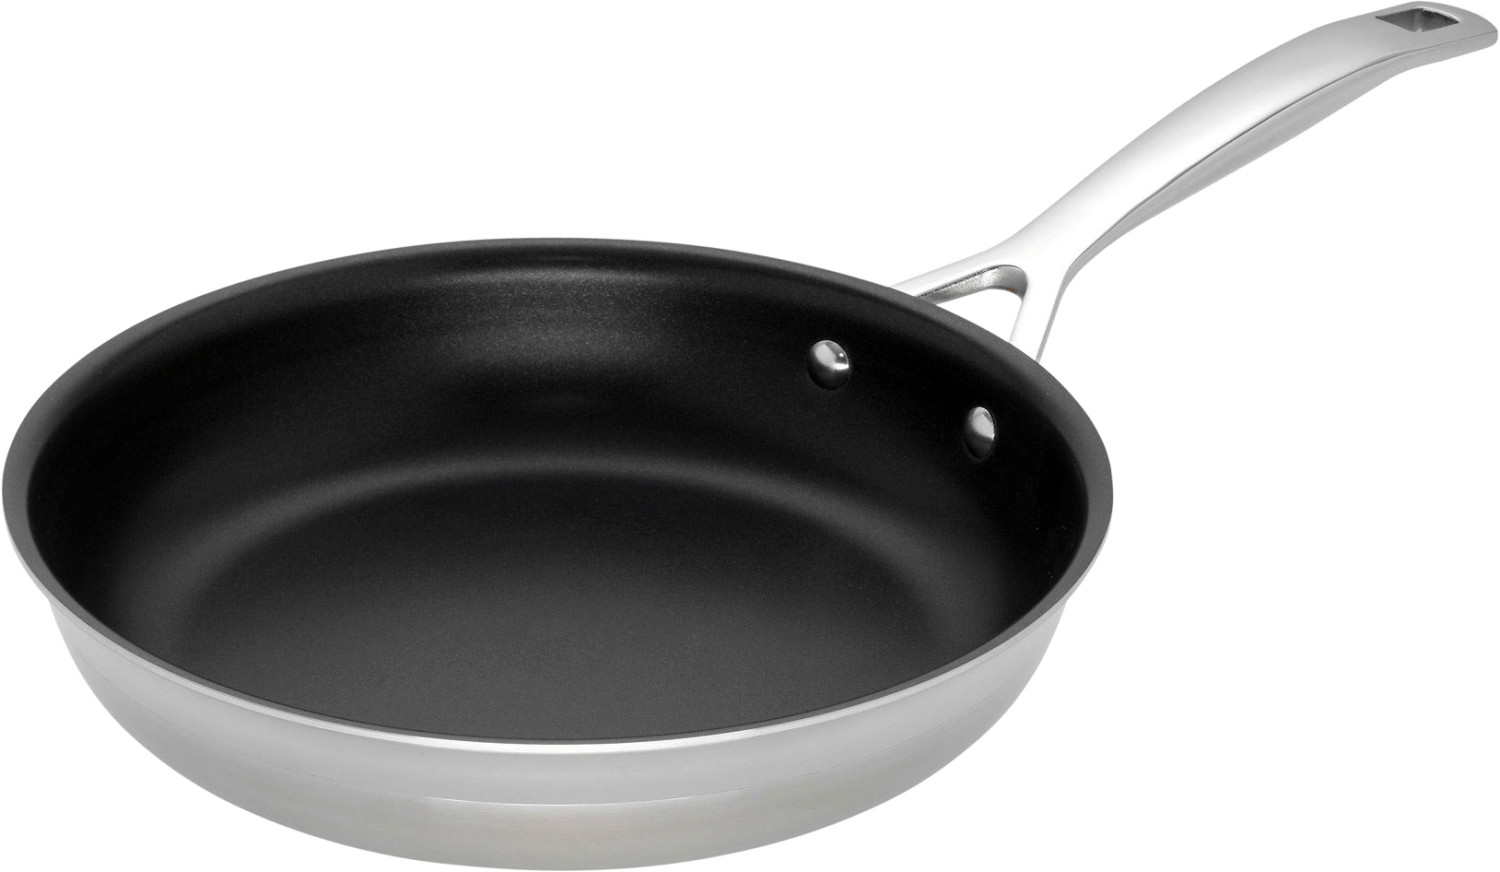 Le Creuset 3-Ply Stainless Steel 28 cm Non-stick Frying Pan